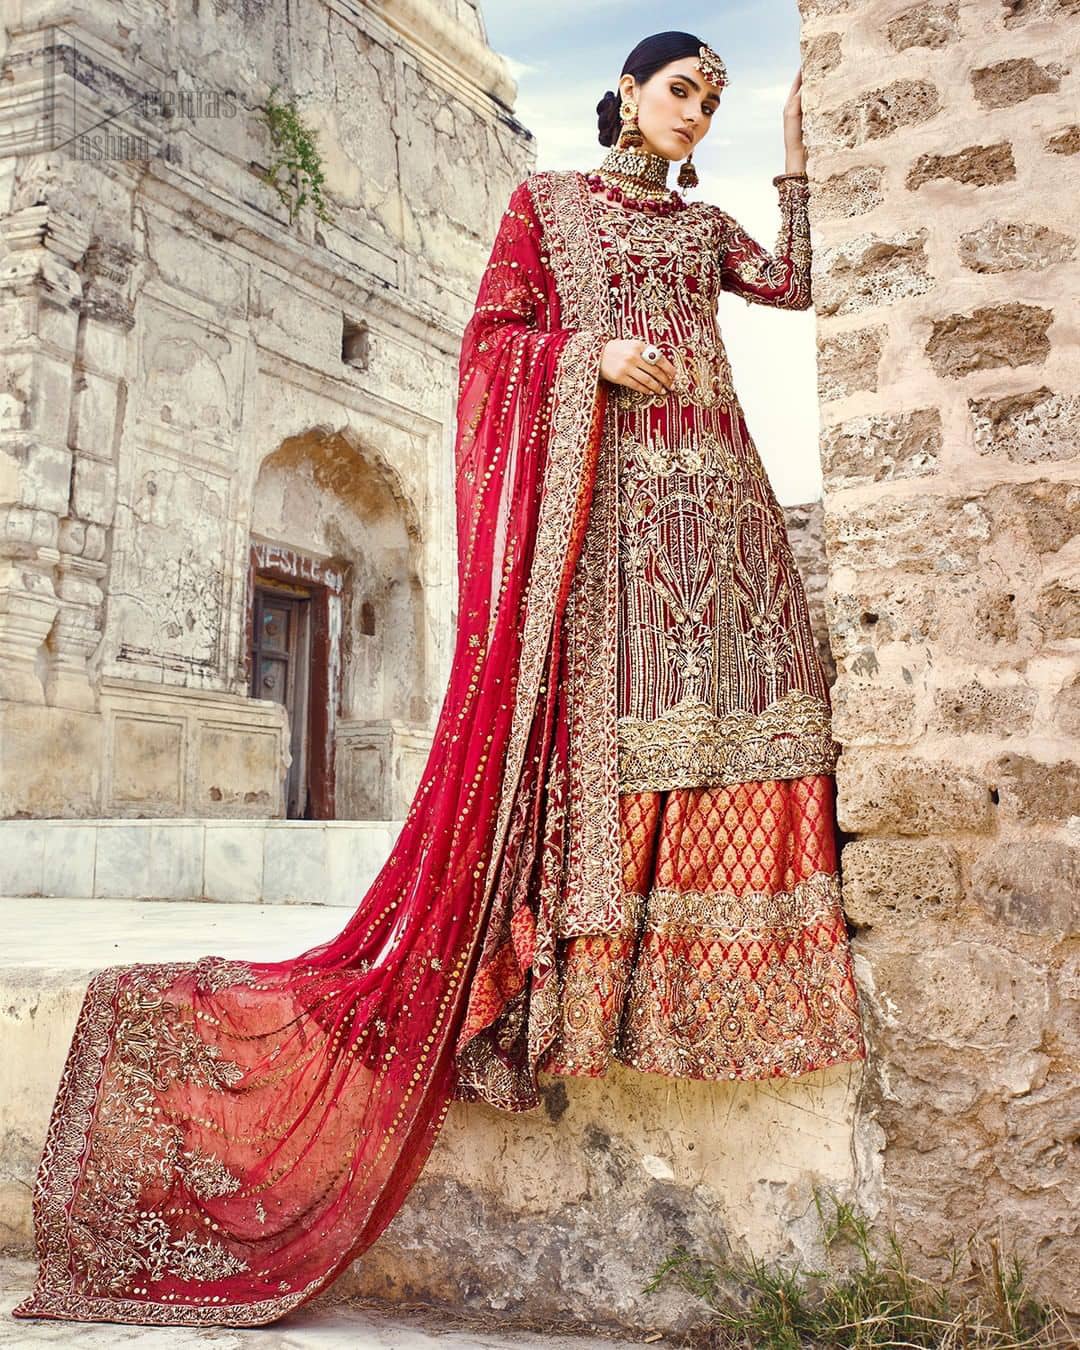 You are all set to make a lasting impact with the divine royalty of this dress. This beautiful dress comes with a maroon back train lehenga with beautiful embellishment around the hem. The shirt is adoned with golden zardozi work around the neckline and vertically worked gold lines and it finished with a thick embellished border. The sleeves are embellished with motifs all over along with a thick embroidered border. The dupatta incorporates beautifully designed borders on all four sides, focusing on the heavily embellished pallu borders to give it a perfect maharani look.